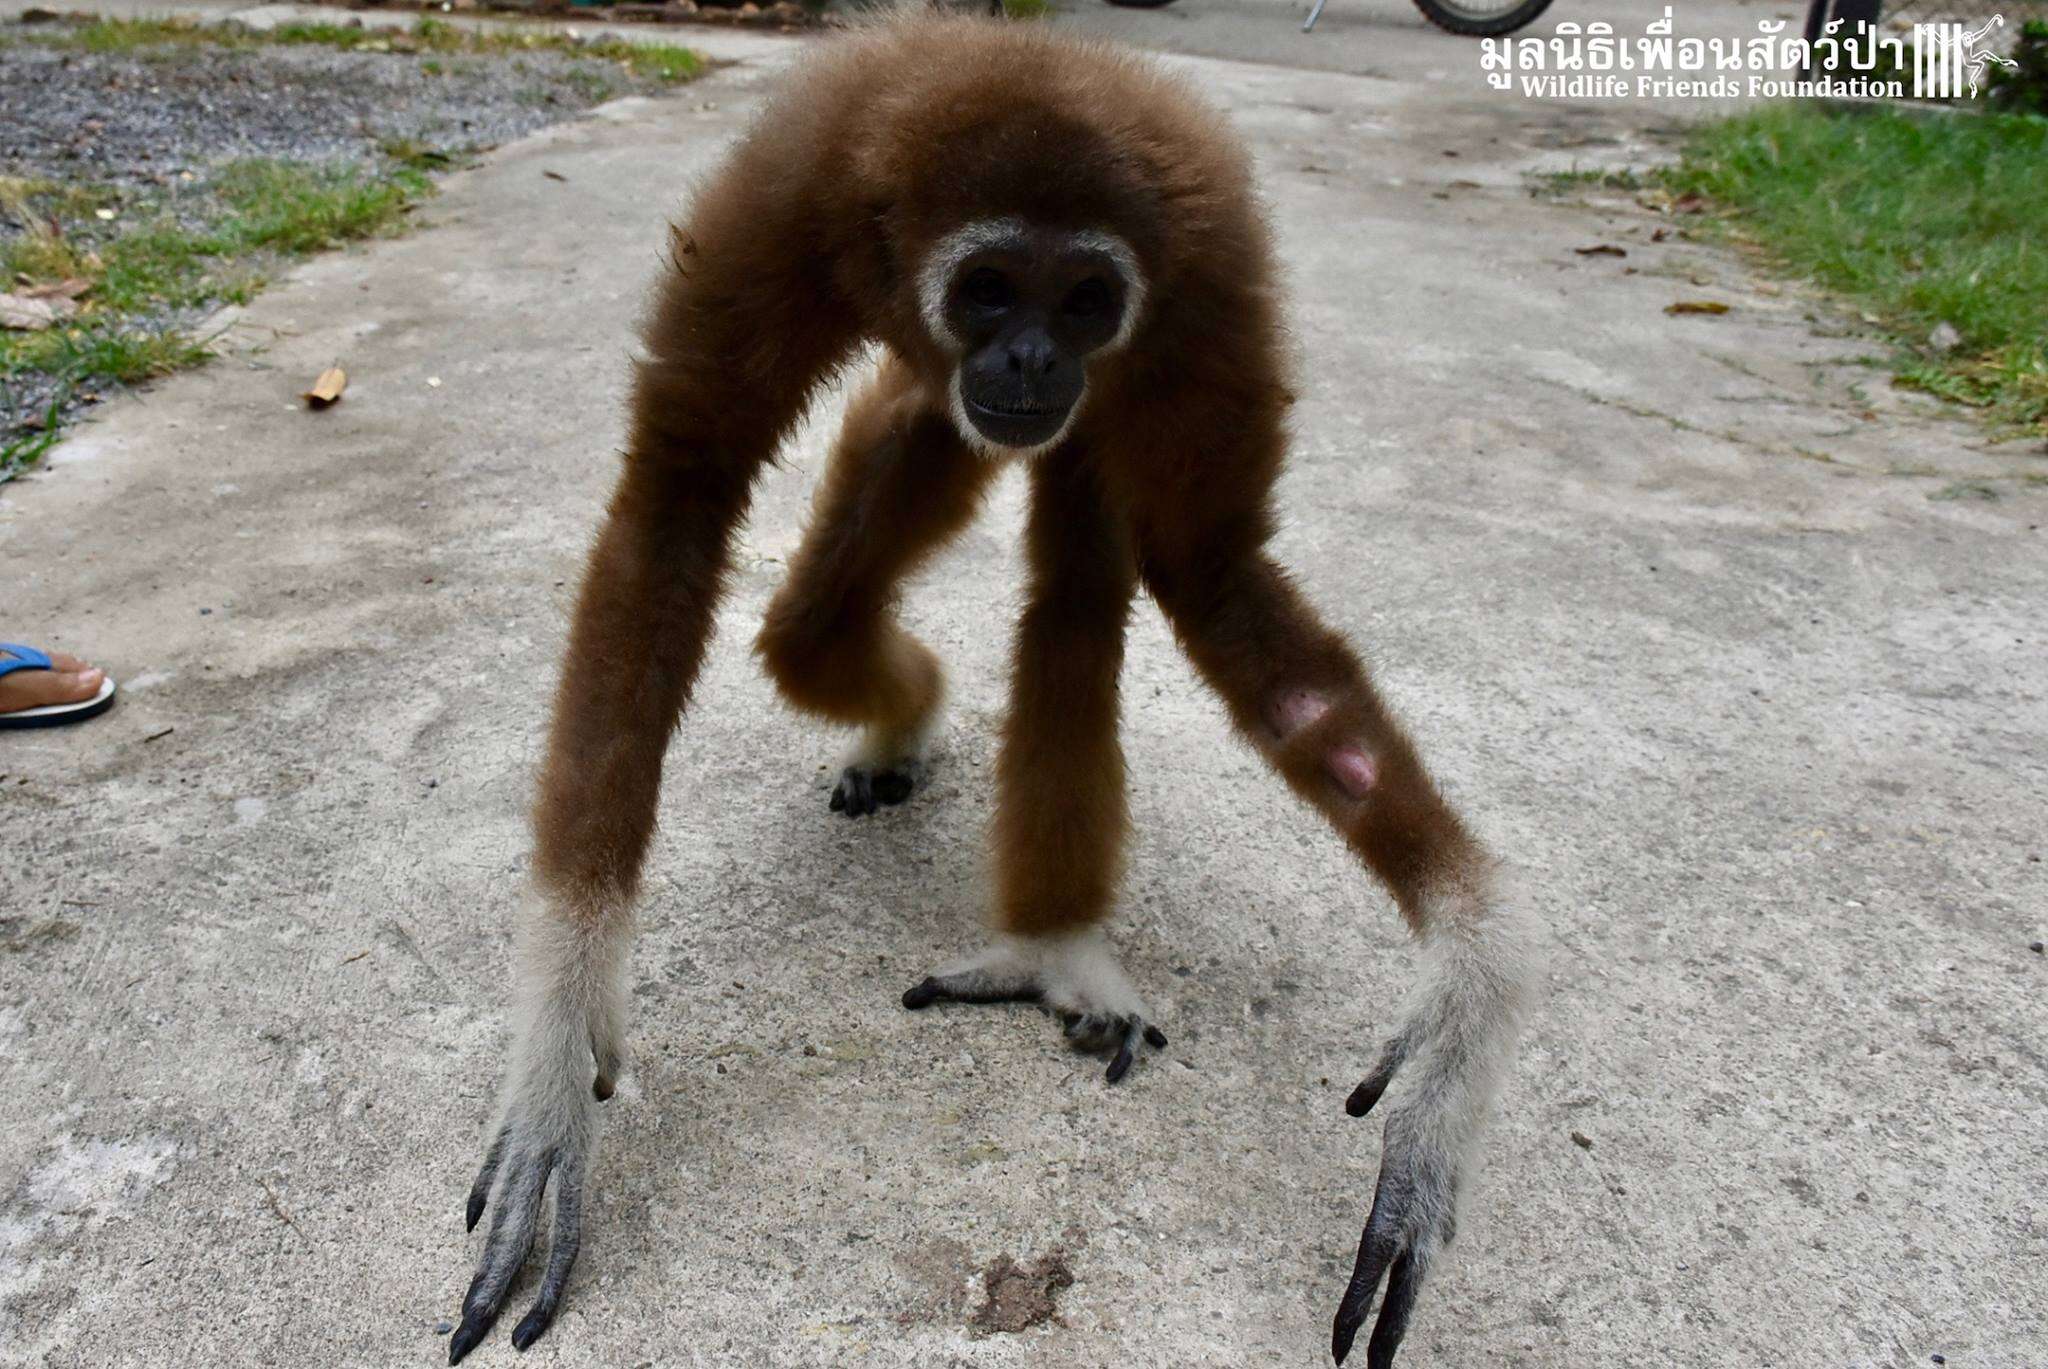 Gibbon rescued from being kept as a pet